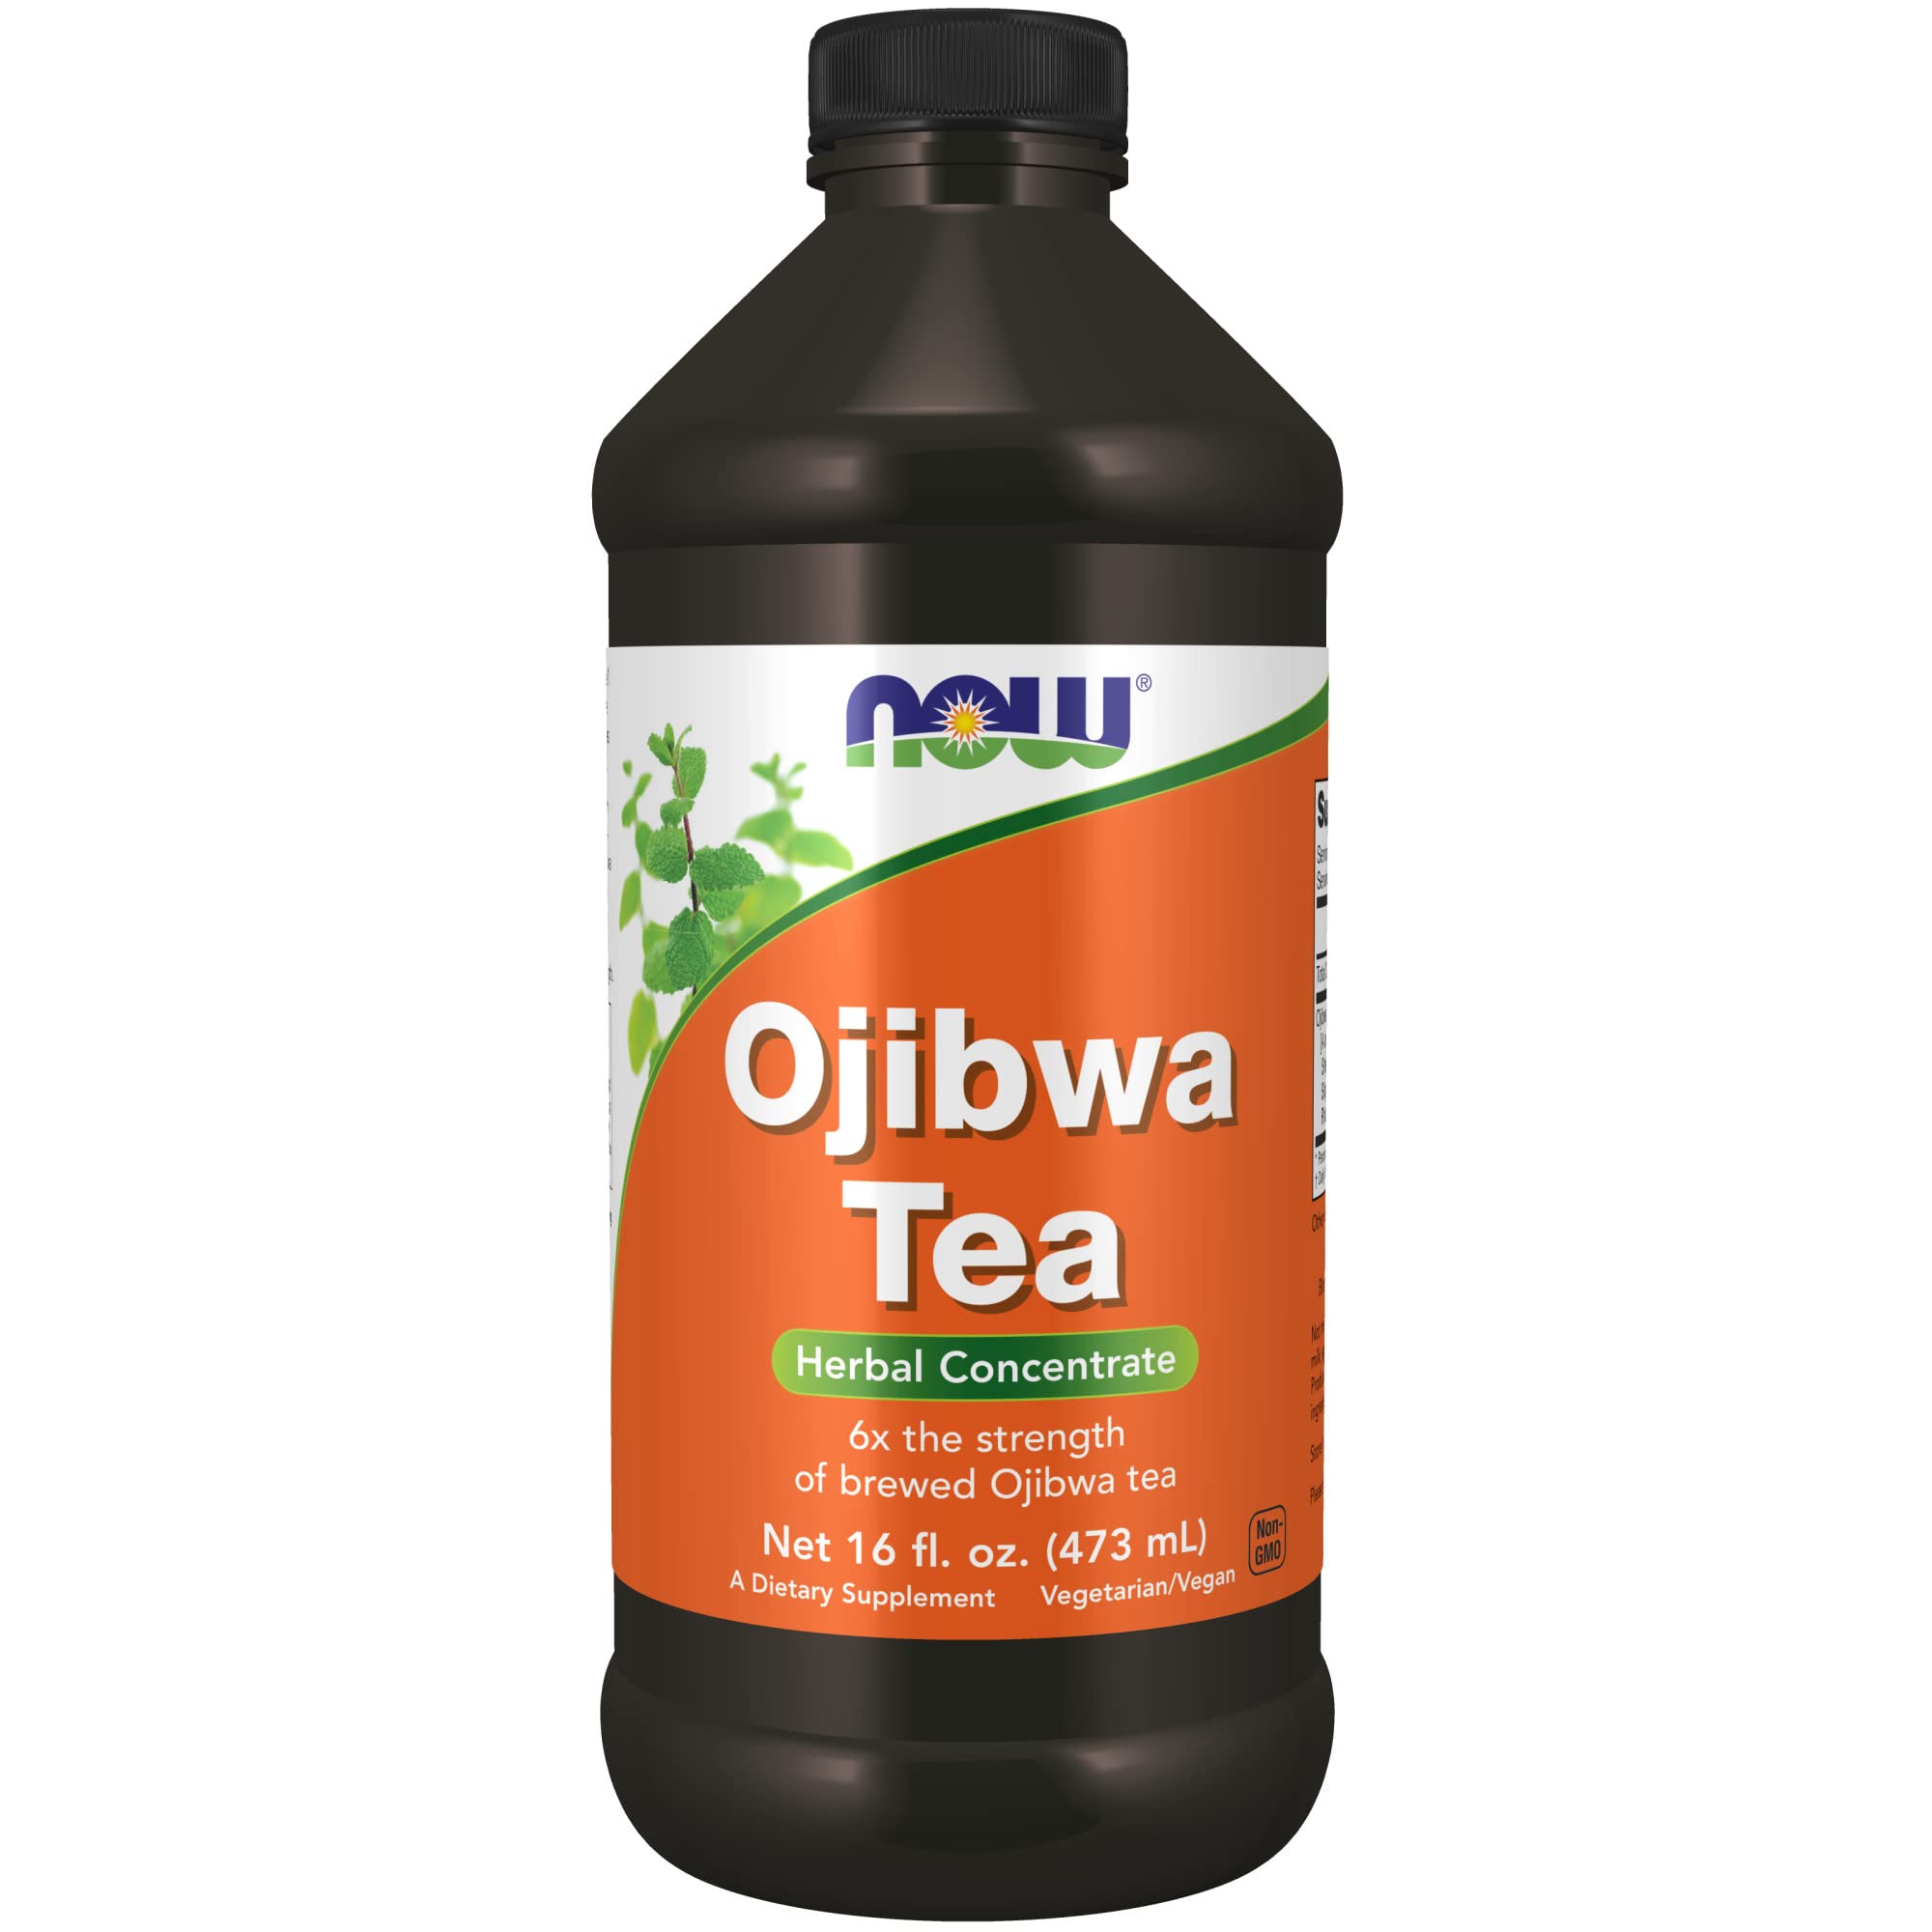 NOW Supplements, Ojibwa Tea Concentrate, 6x the strength of brewed Ojibwa Tea, Herbal Concentrate, 16-Ounce